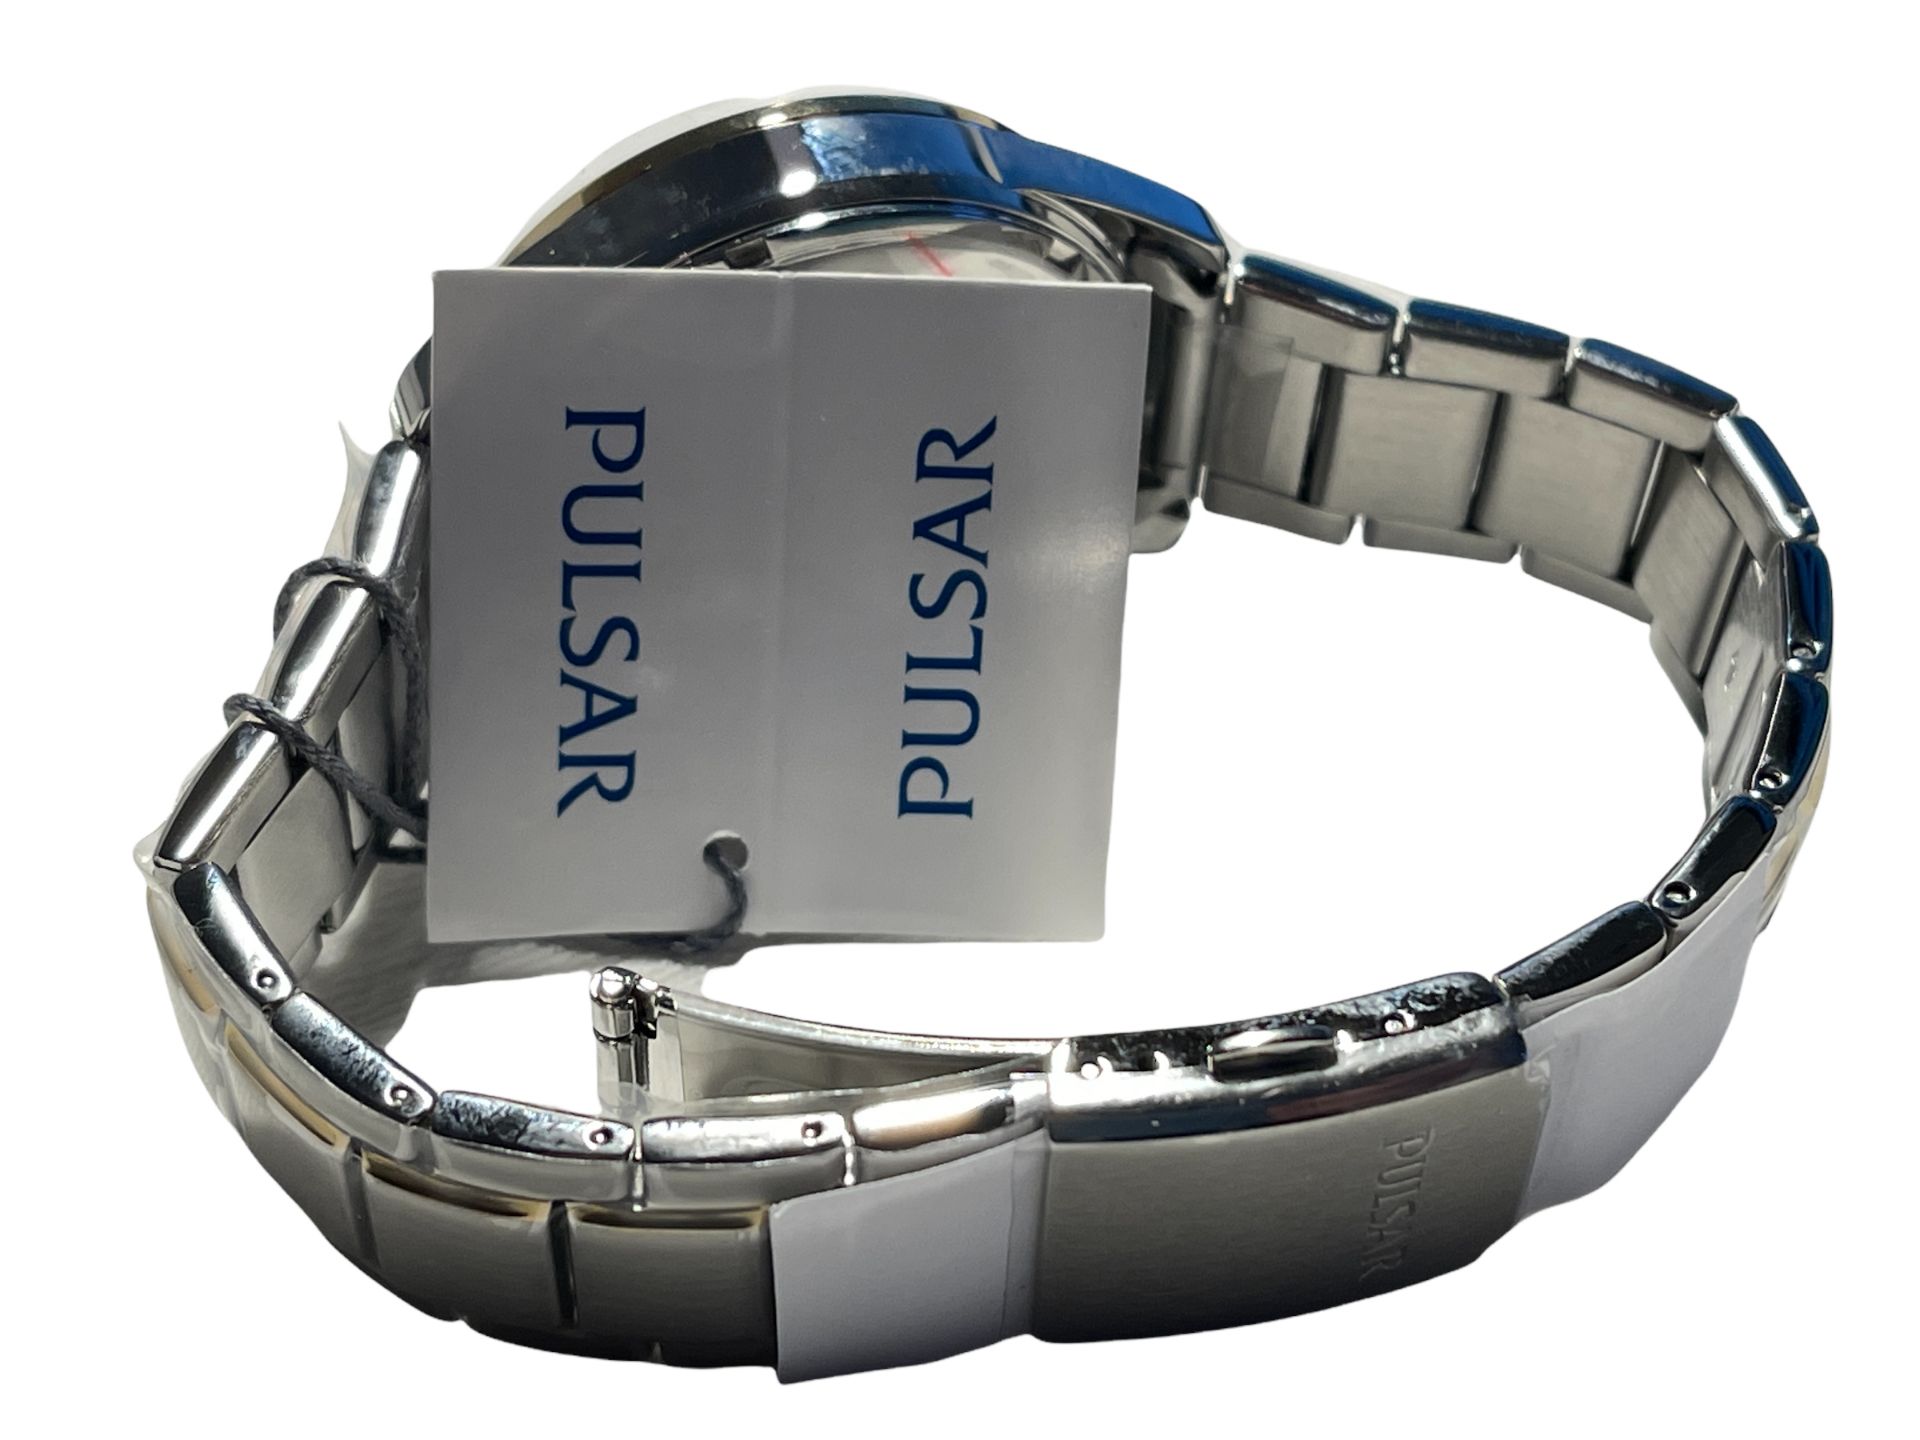 Pulsar Stainless Steel Men's Quartz Battery Watch - Surplus Stock/Ex Demo from Private Jet Charter.. - Image 4 of 4